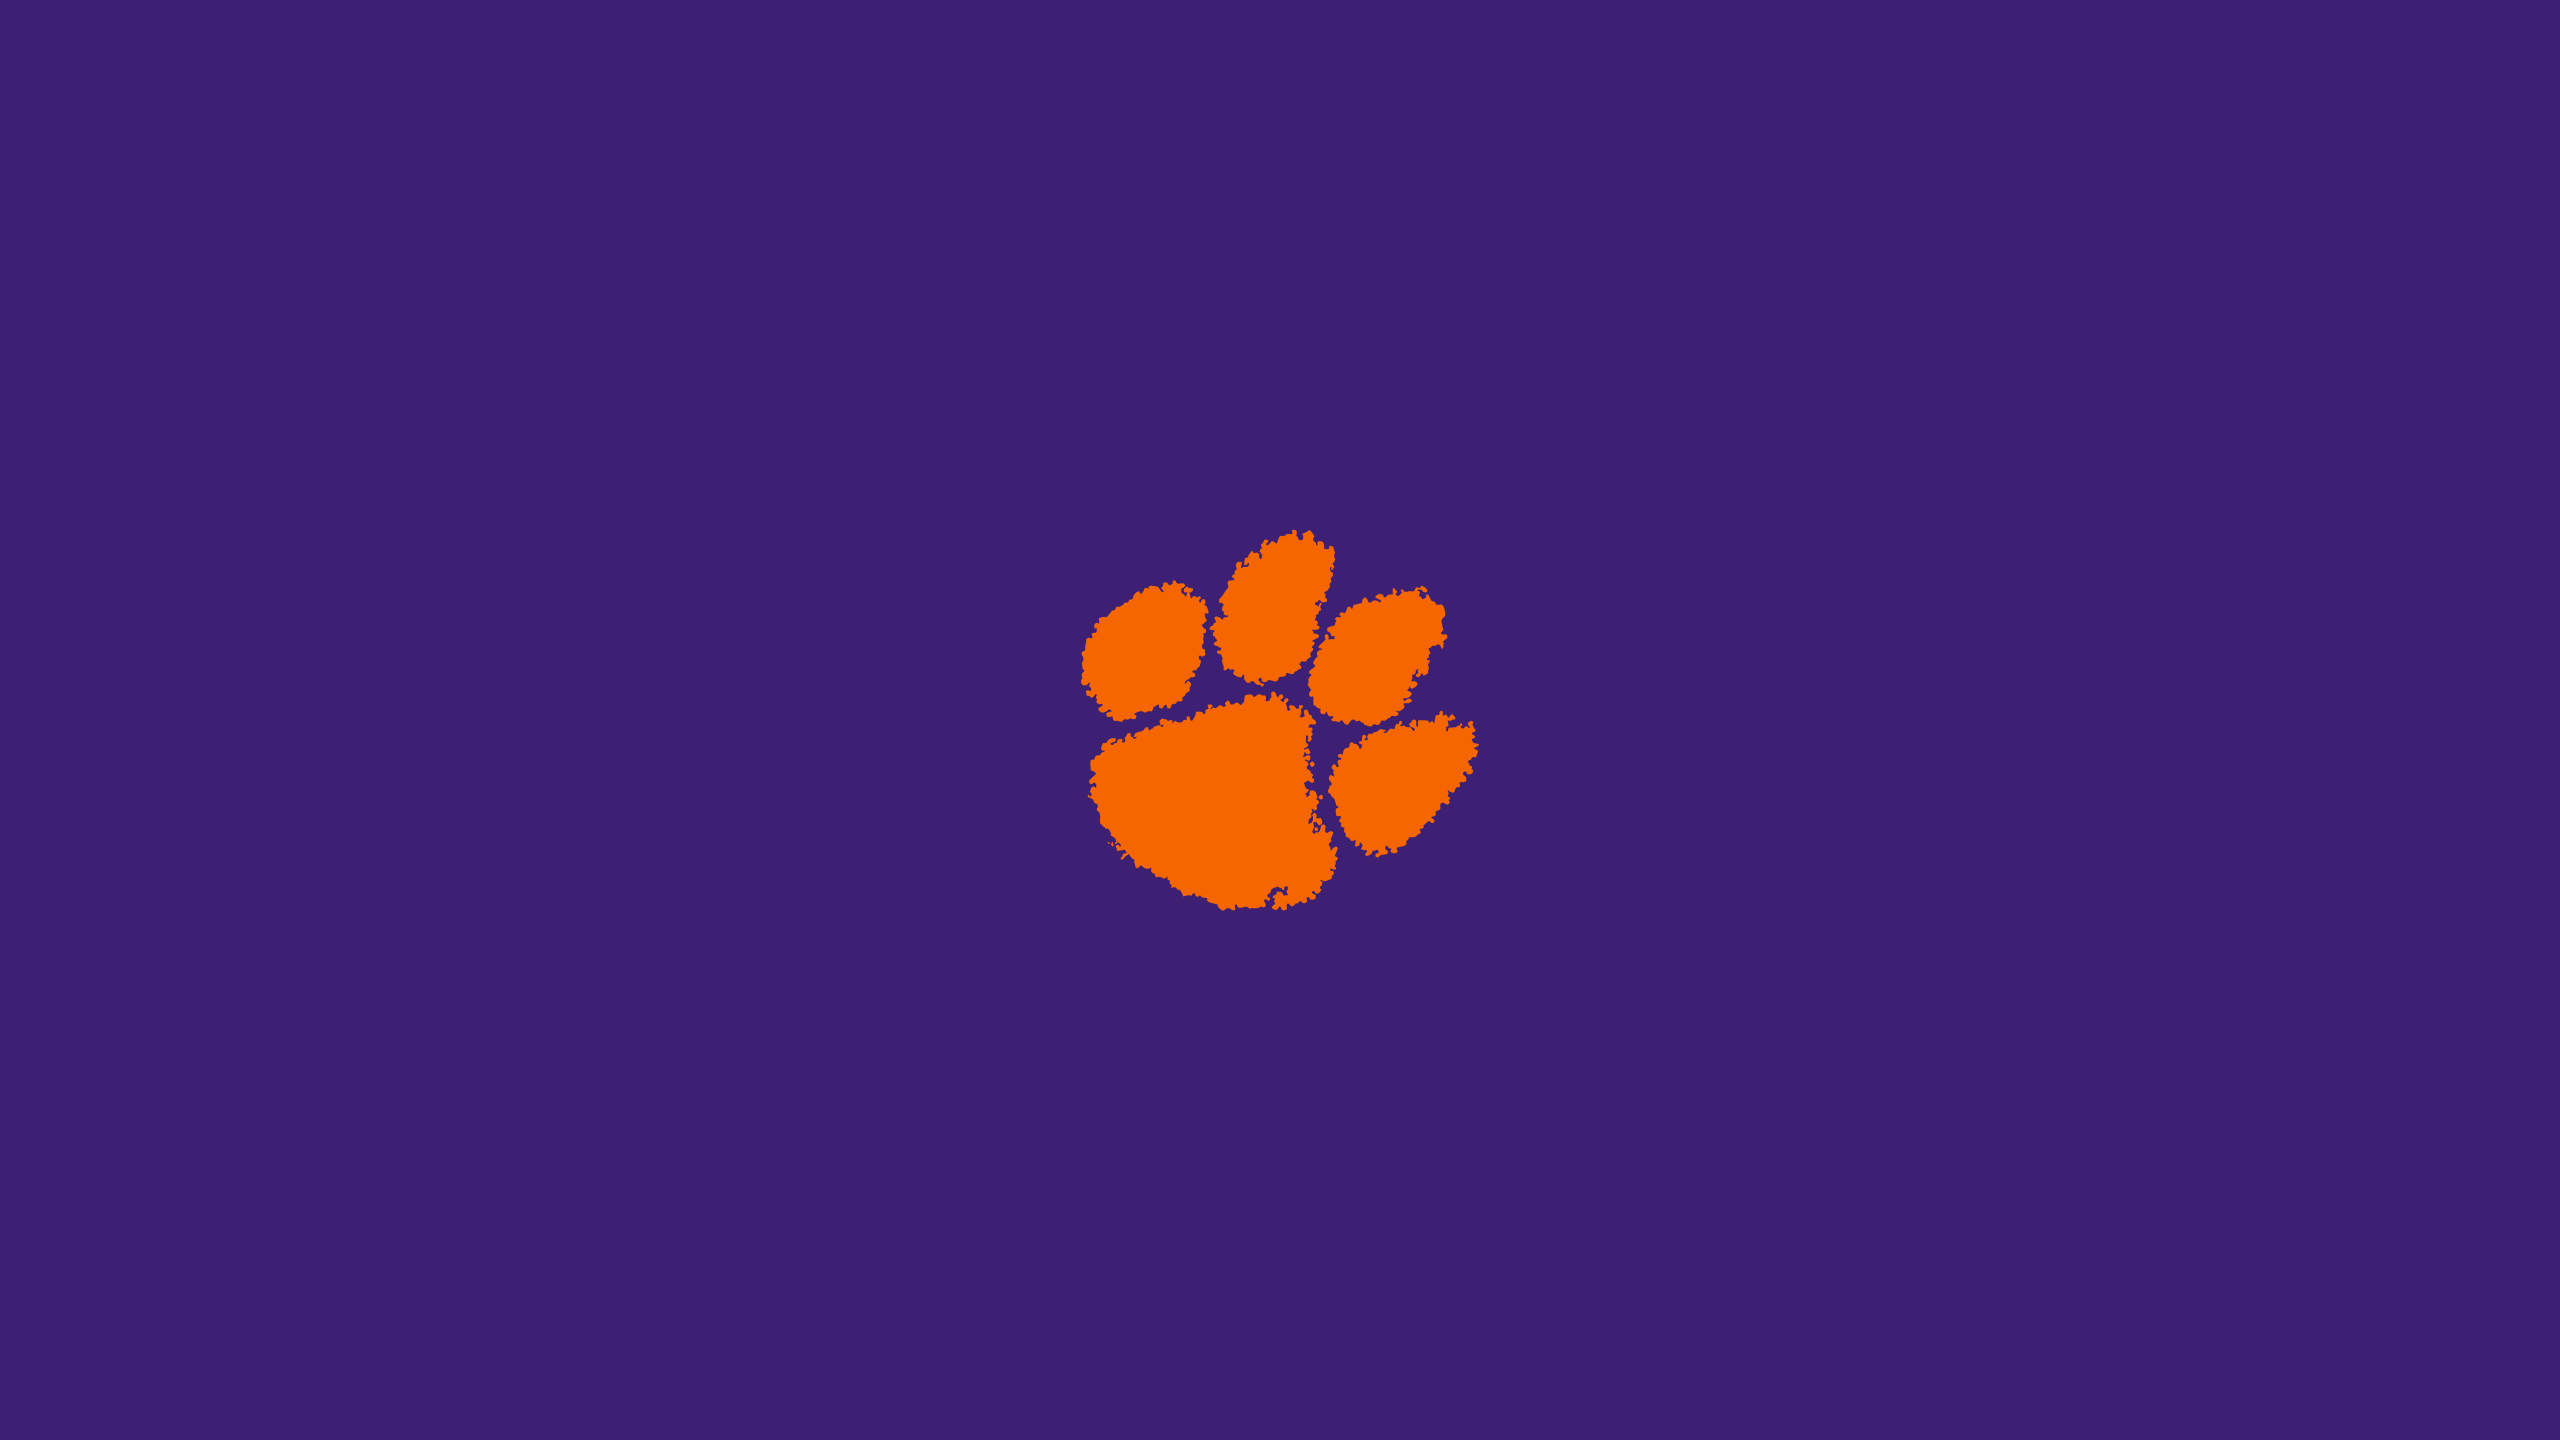 Clemson Tigers Basketball - NCAAB - Square Bettor